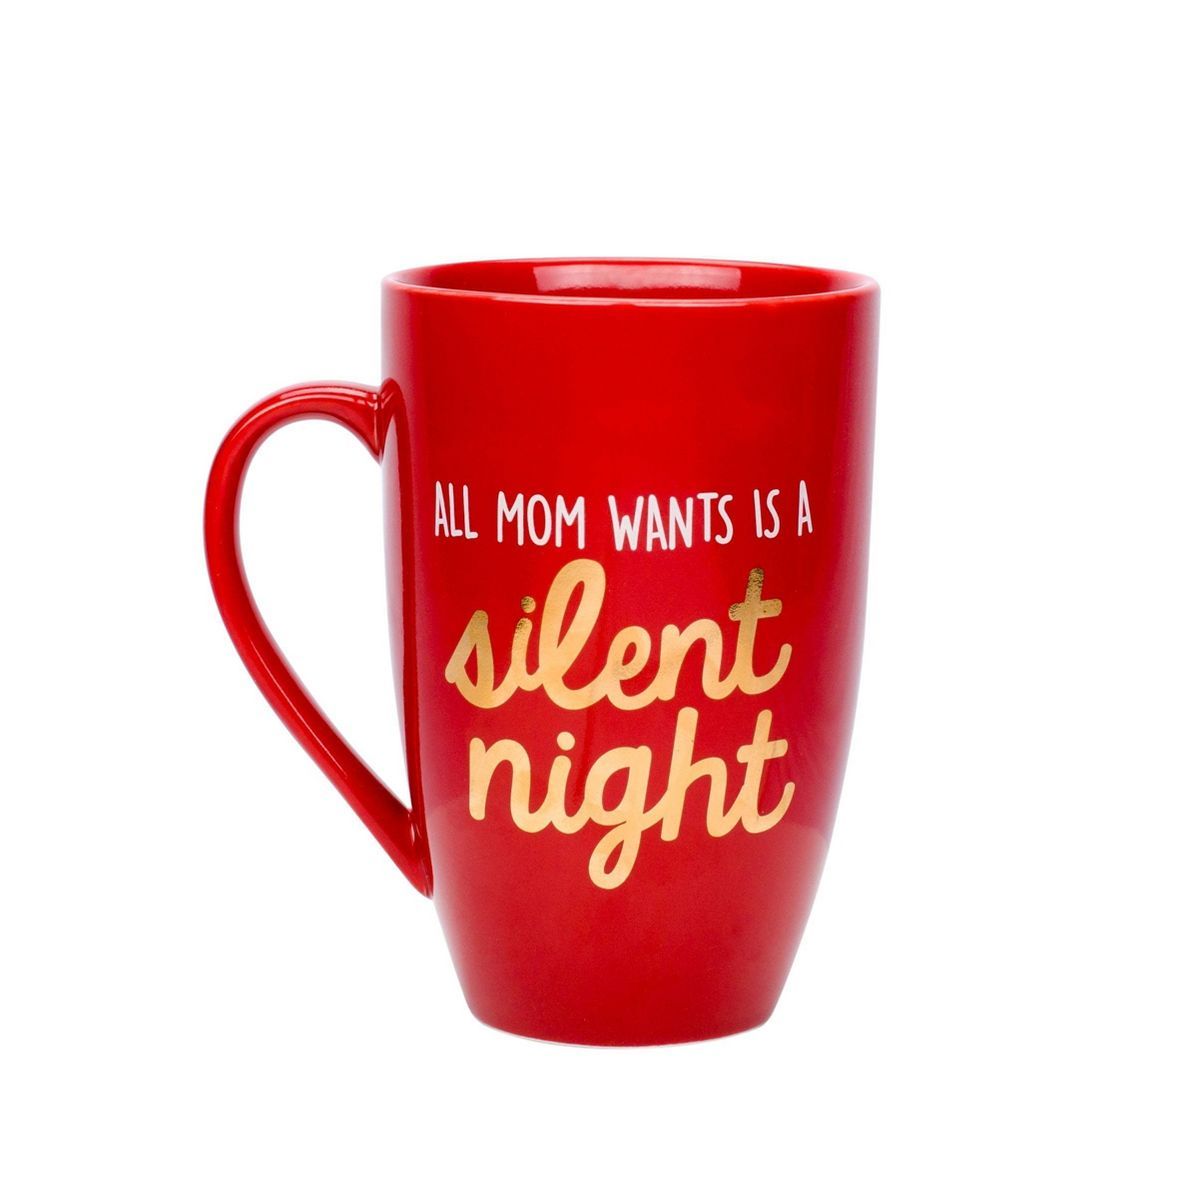 Pearhead "All Mom Wants is a Silent Night" Mug - Red 22oz | Target